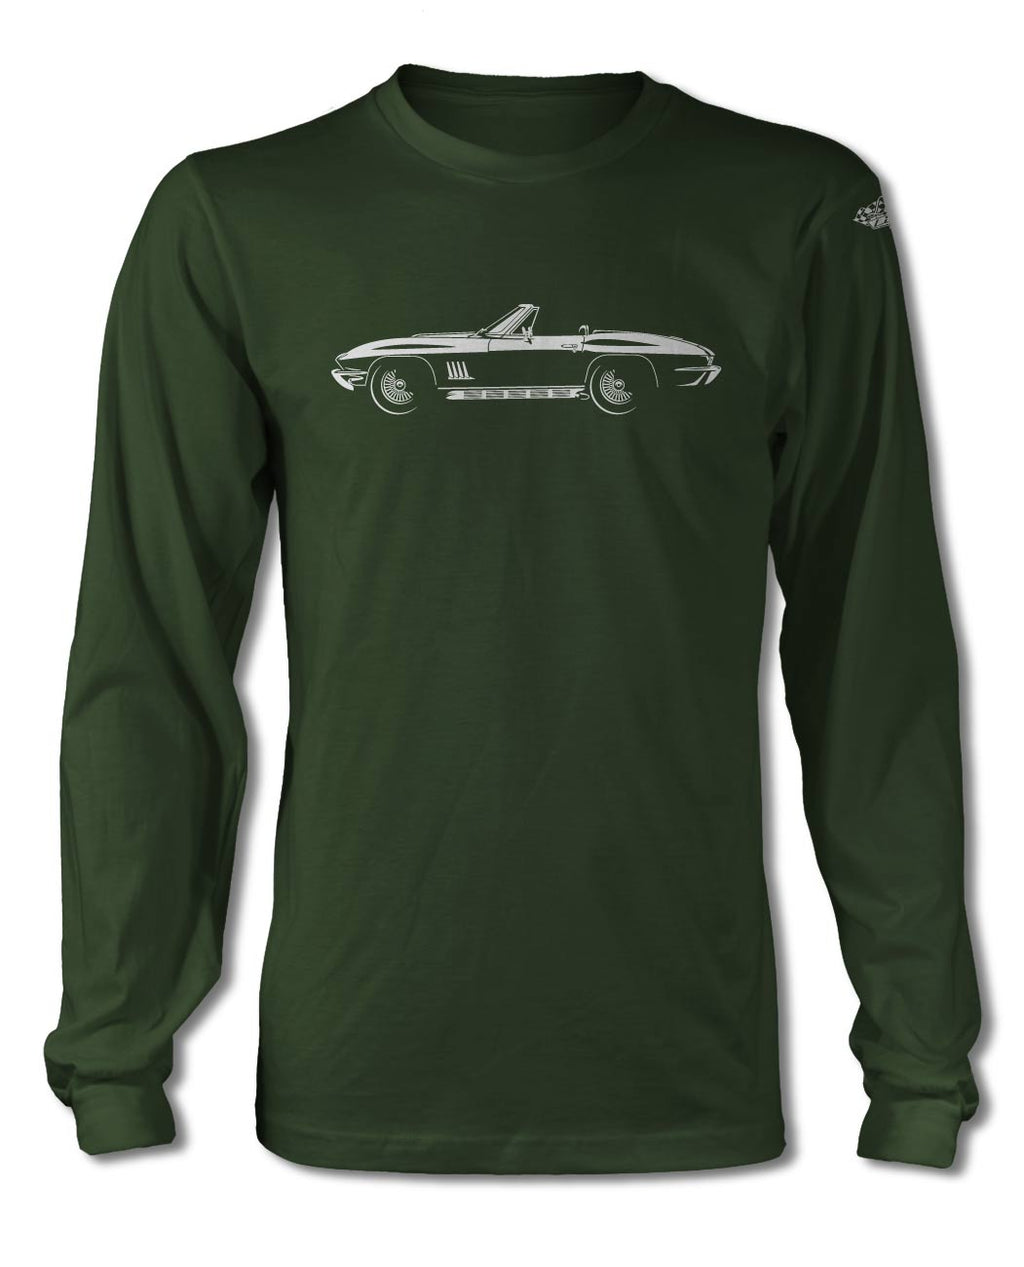 1967 Chevrolet Corvette 427 Sting Ray Convertible C2 T-Shirt - Long Sleeves - Side View